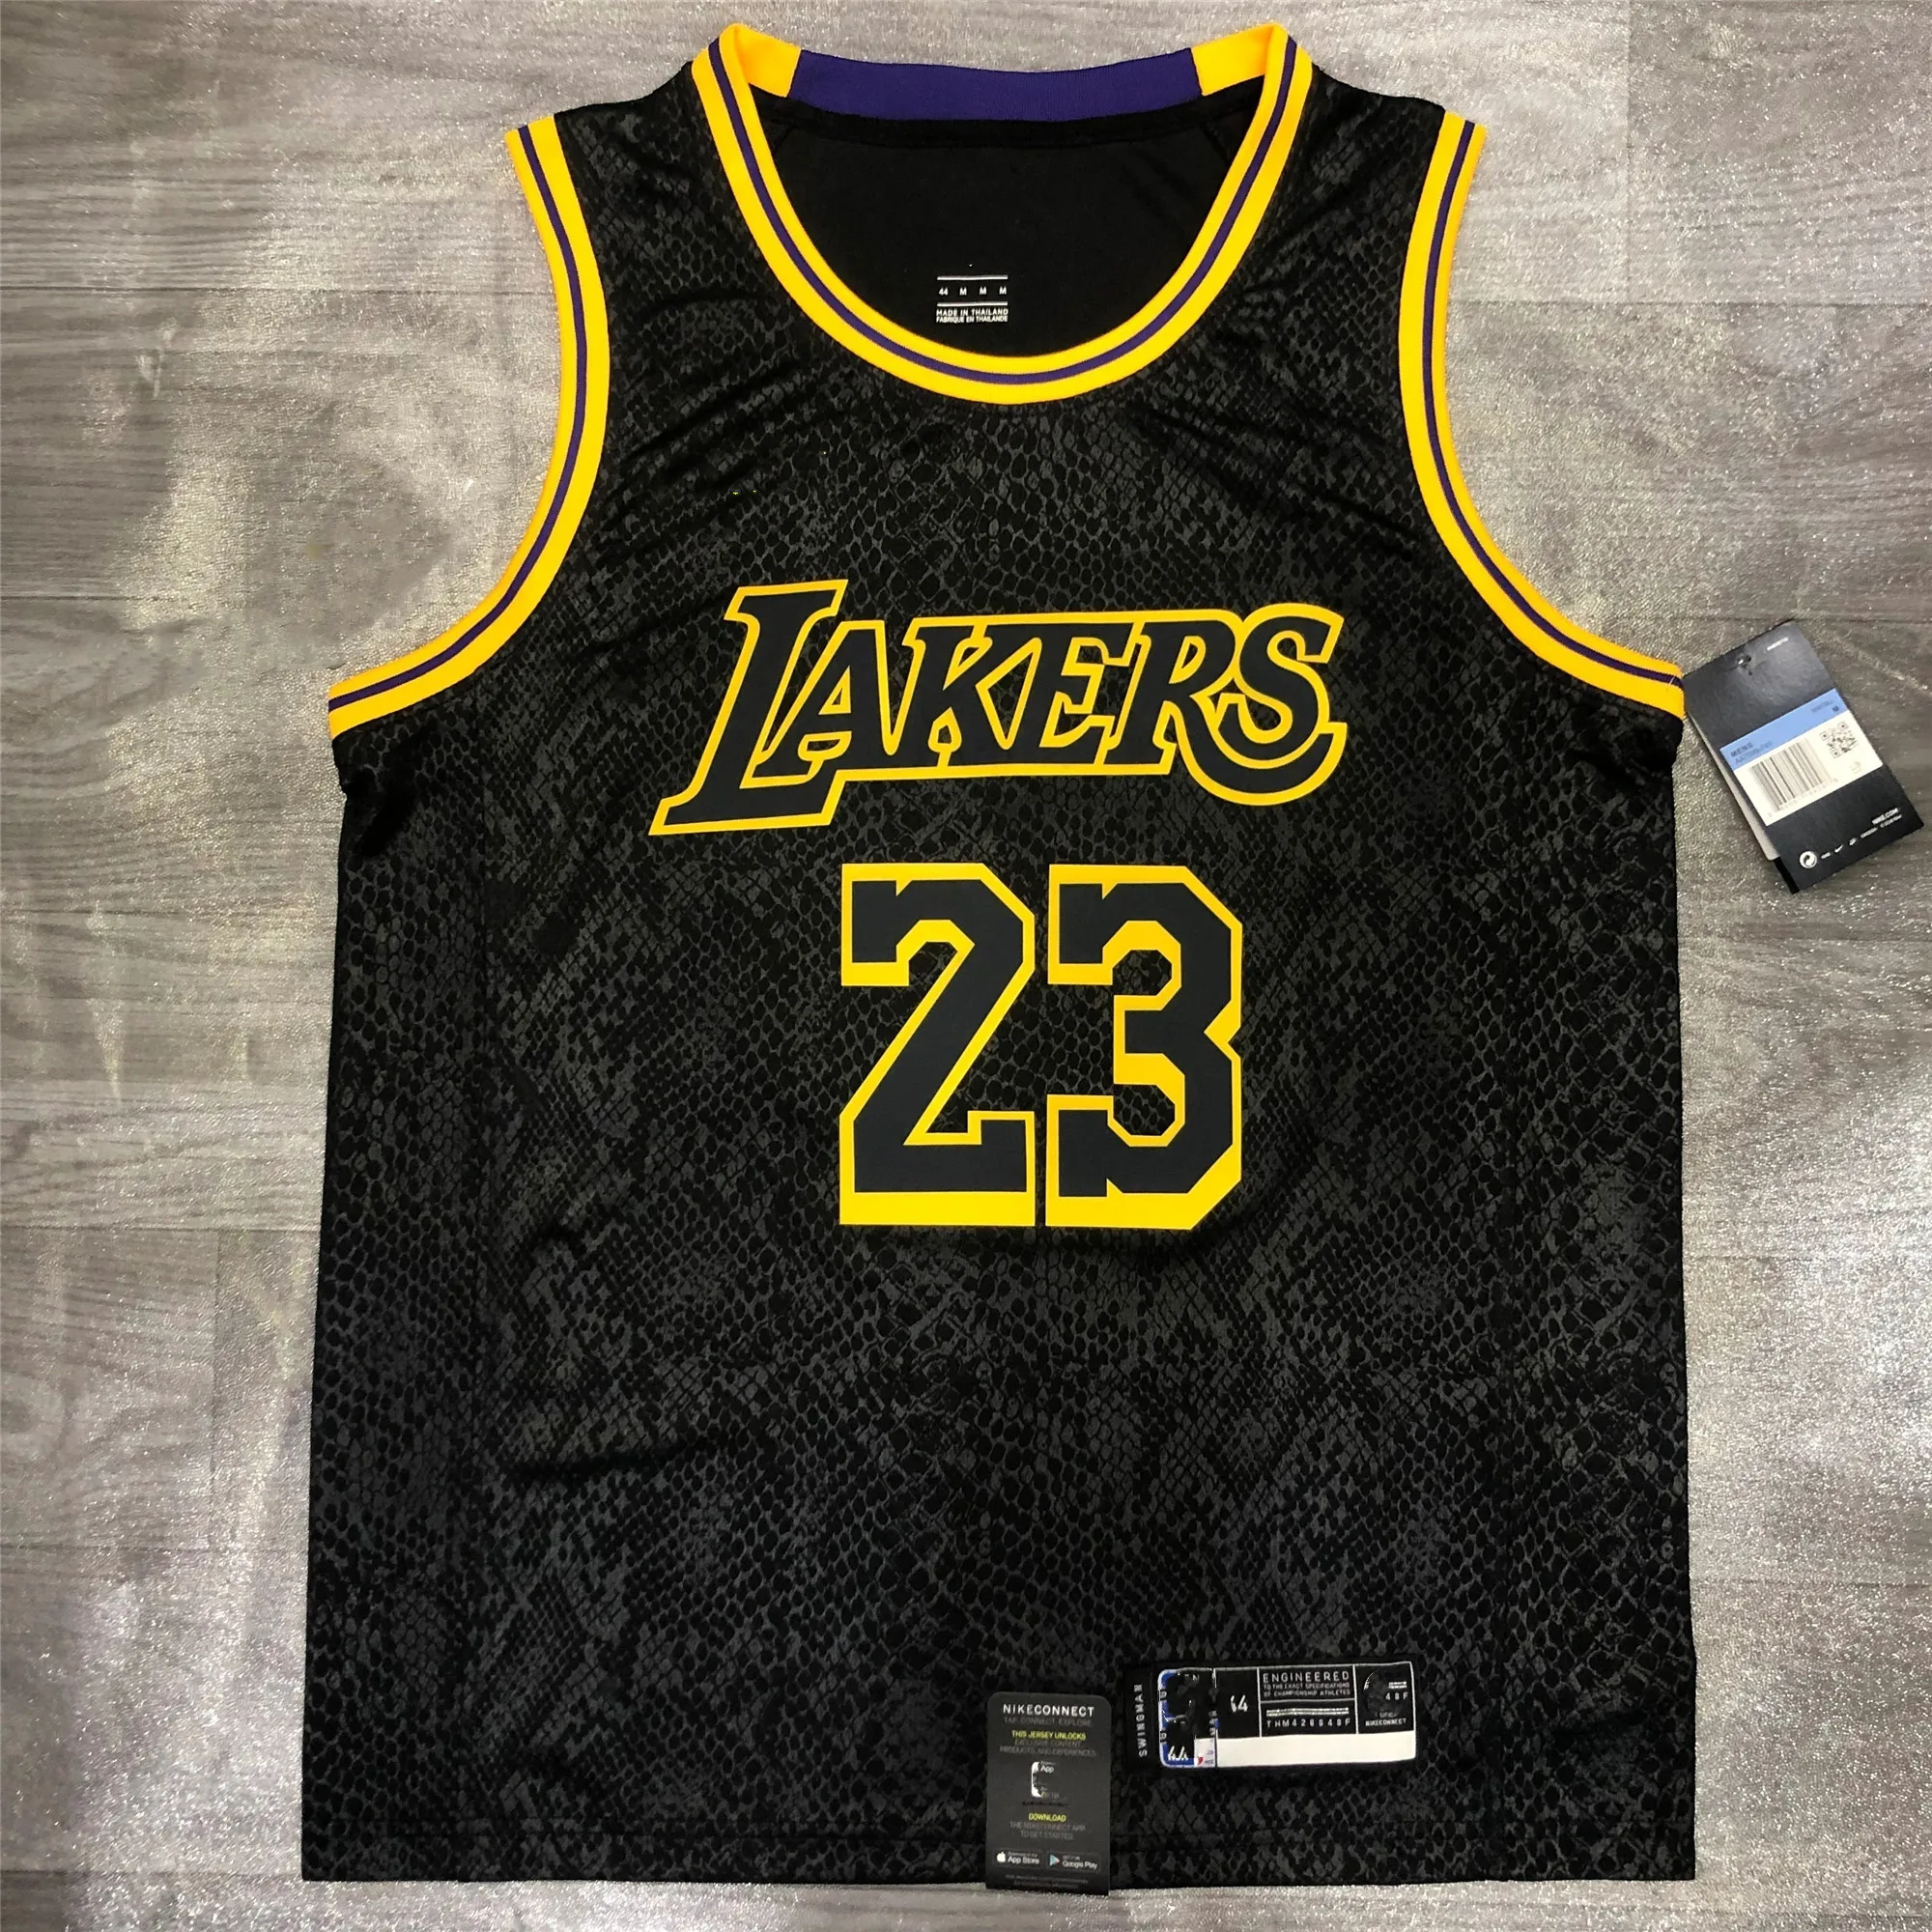 

2021 Best Quality NB A Laker s Basketball Jersey Retro Bryant# 24 Davis#3 James#23 Sports Wear uniform Custom Name and Number, As picture